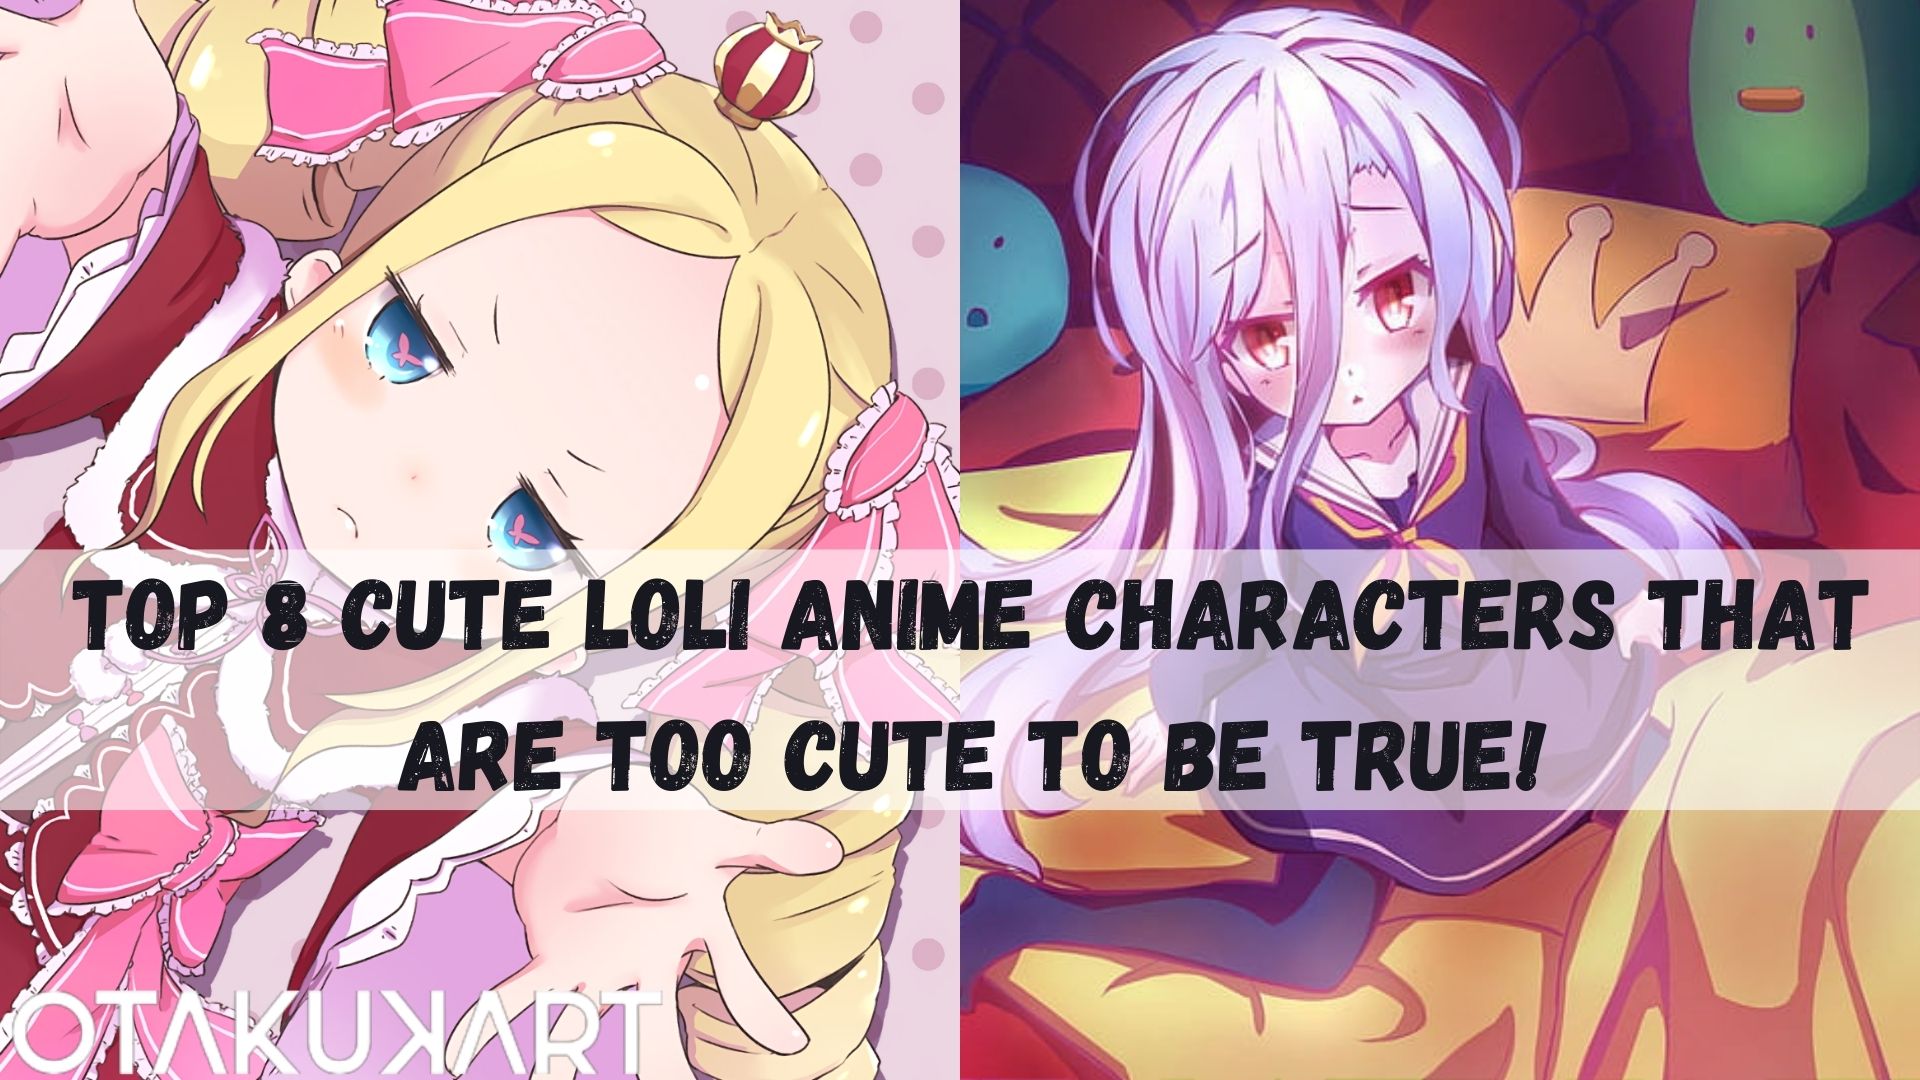 Cute Loli Anime Characters That Are Too Cute To Be True!